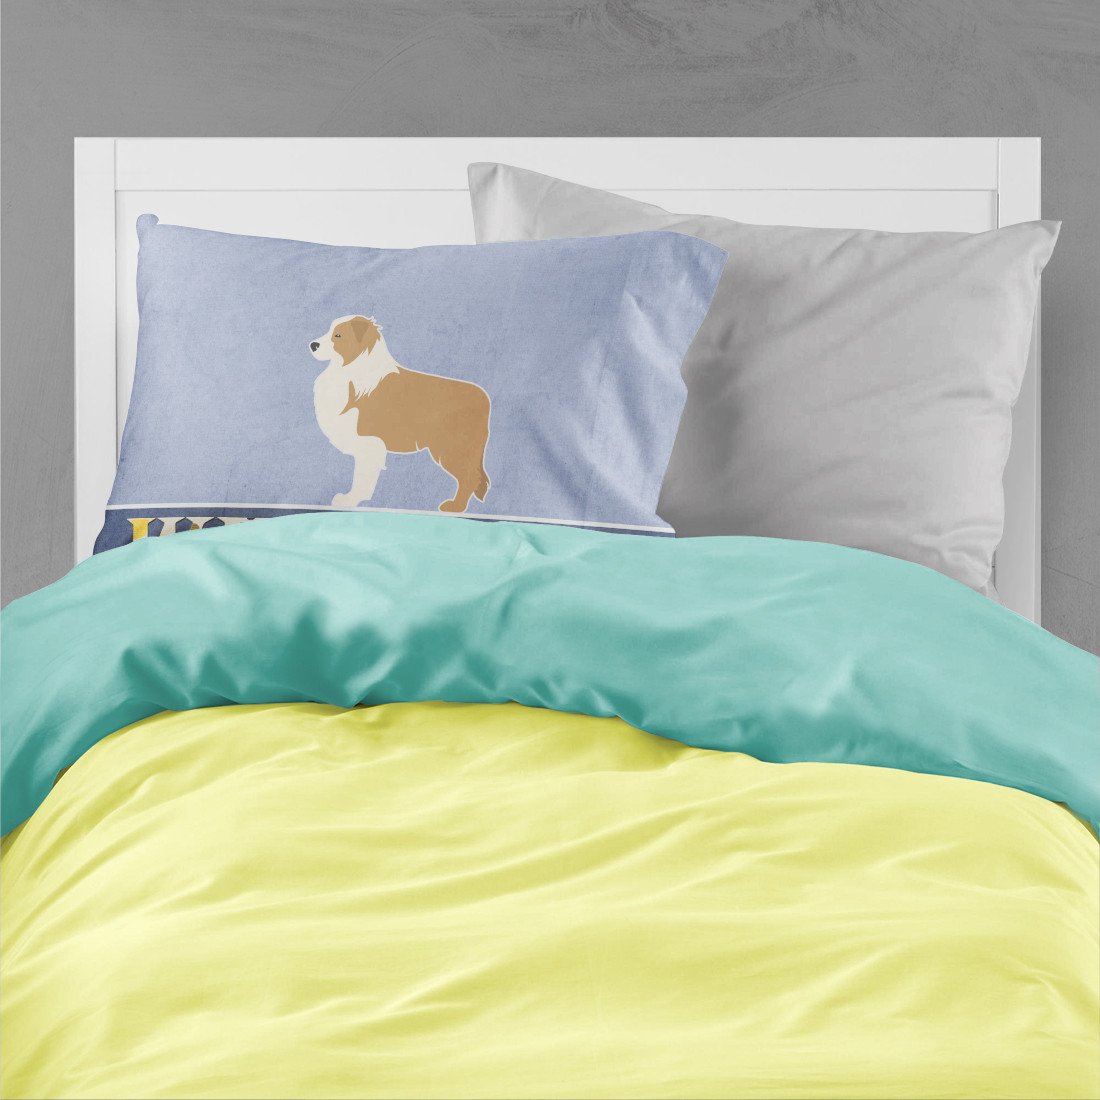 Red Border Collie Welcome Fabric Standard Pillowcase BB5526PILLOWCASE by Caroline's Treasures